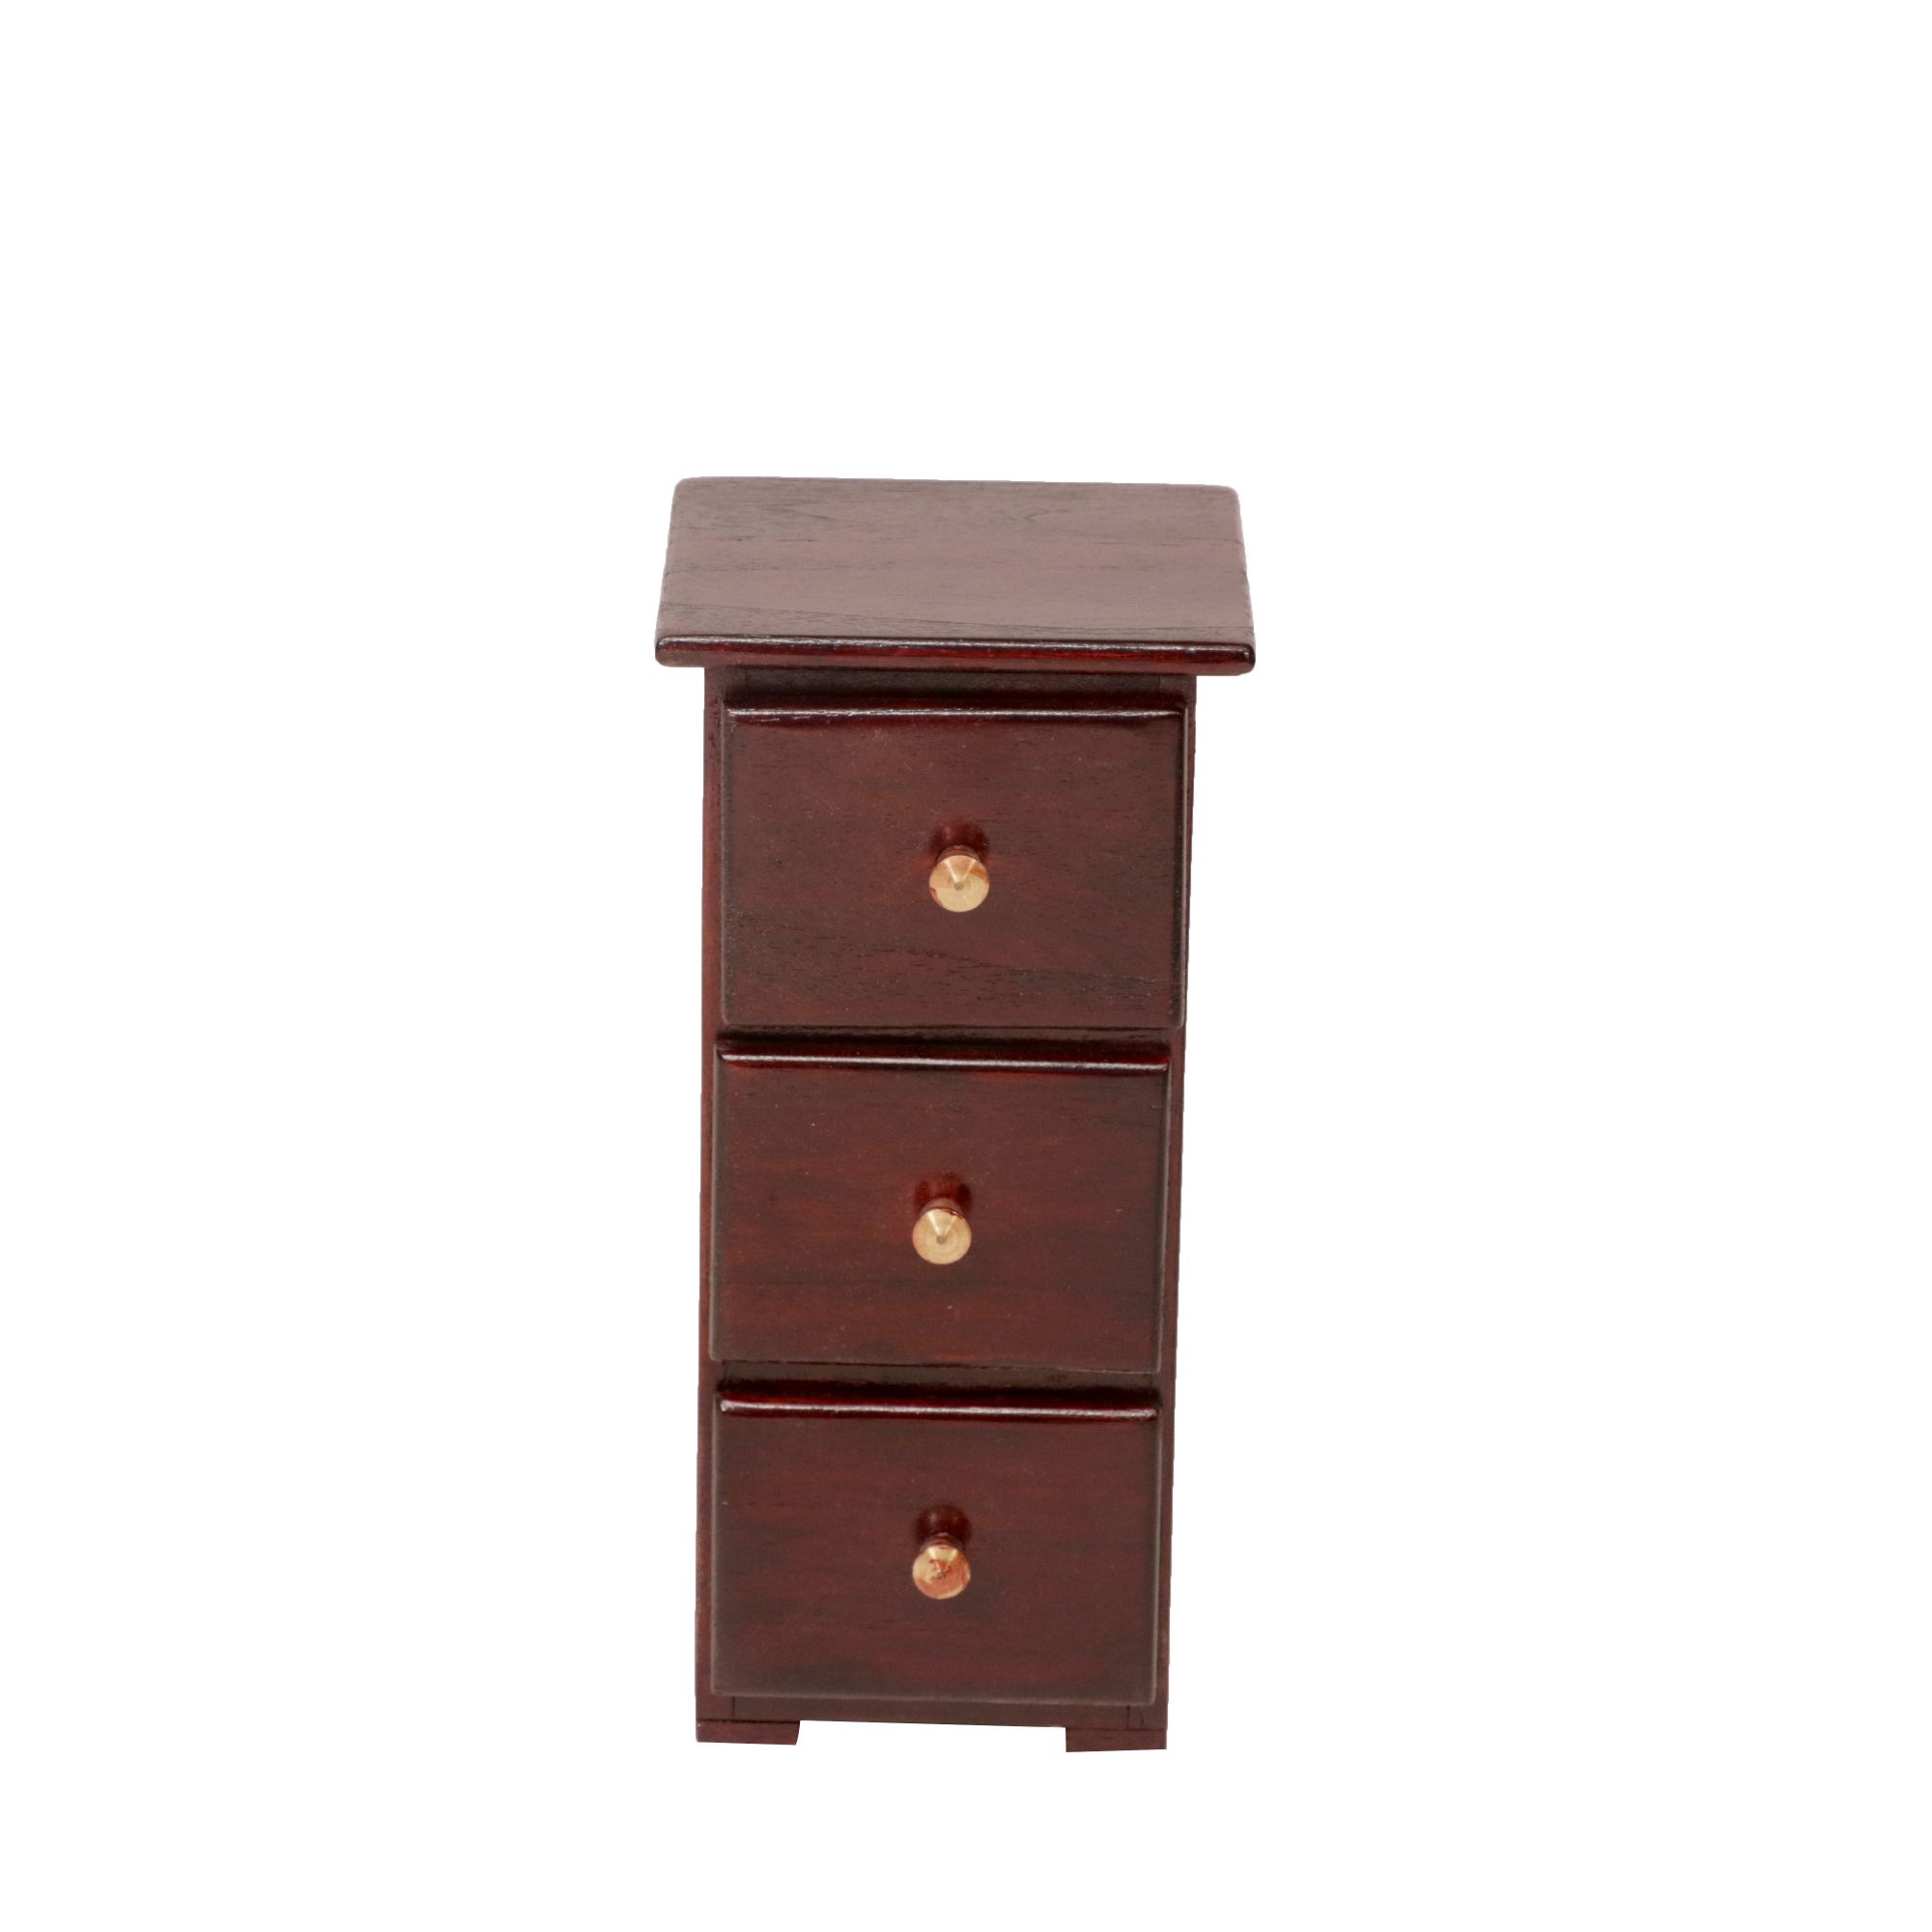 Wooden Miniature Outer Space 3 Drawer Chest Tower (The product is used as Desk organiser) (Mahogany Touch) Desk Organizer